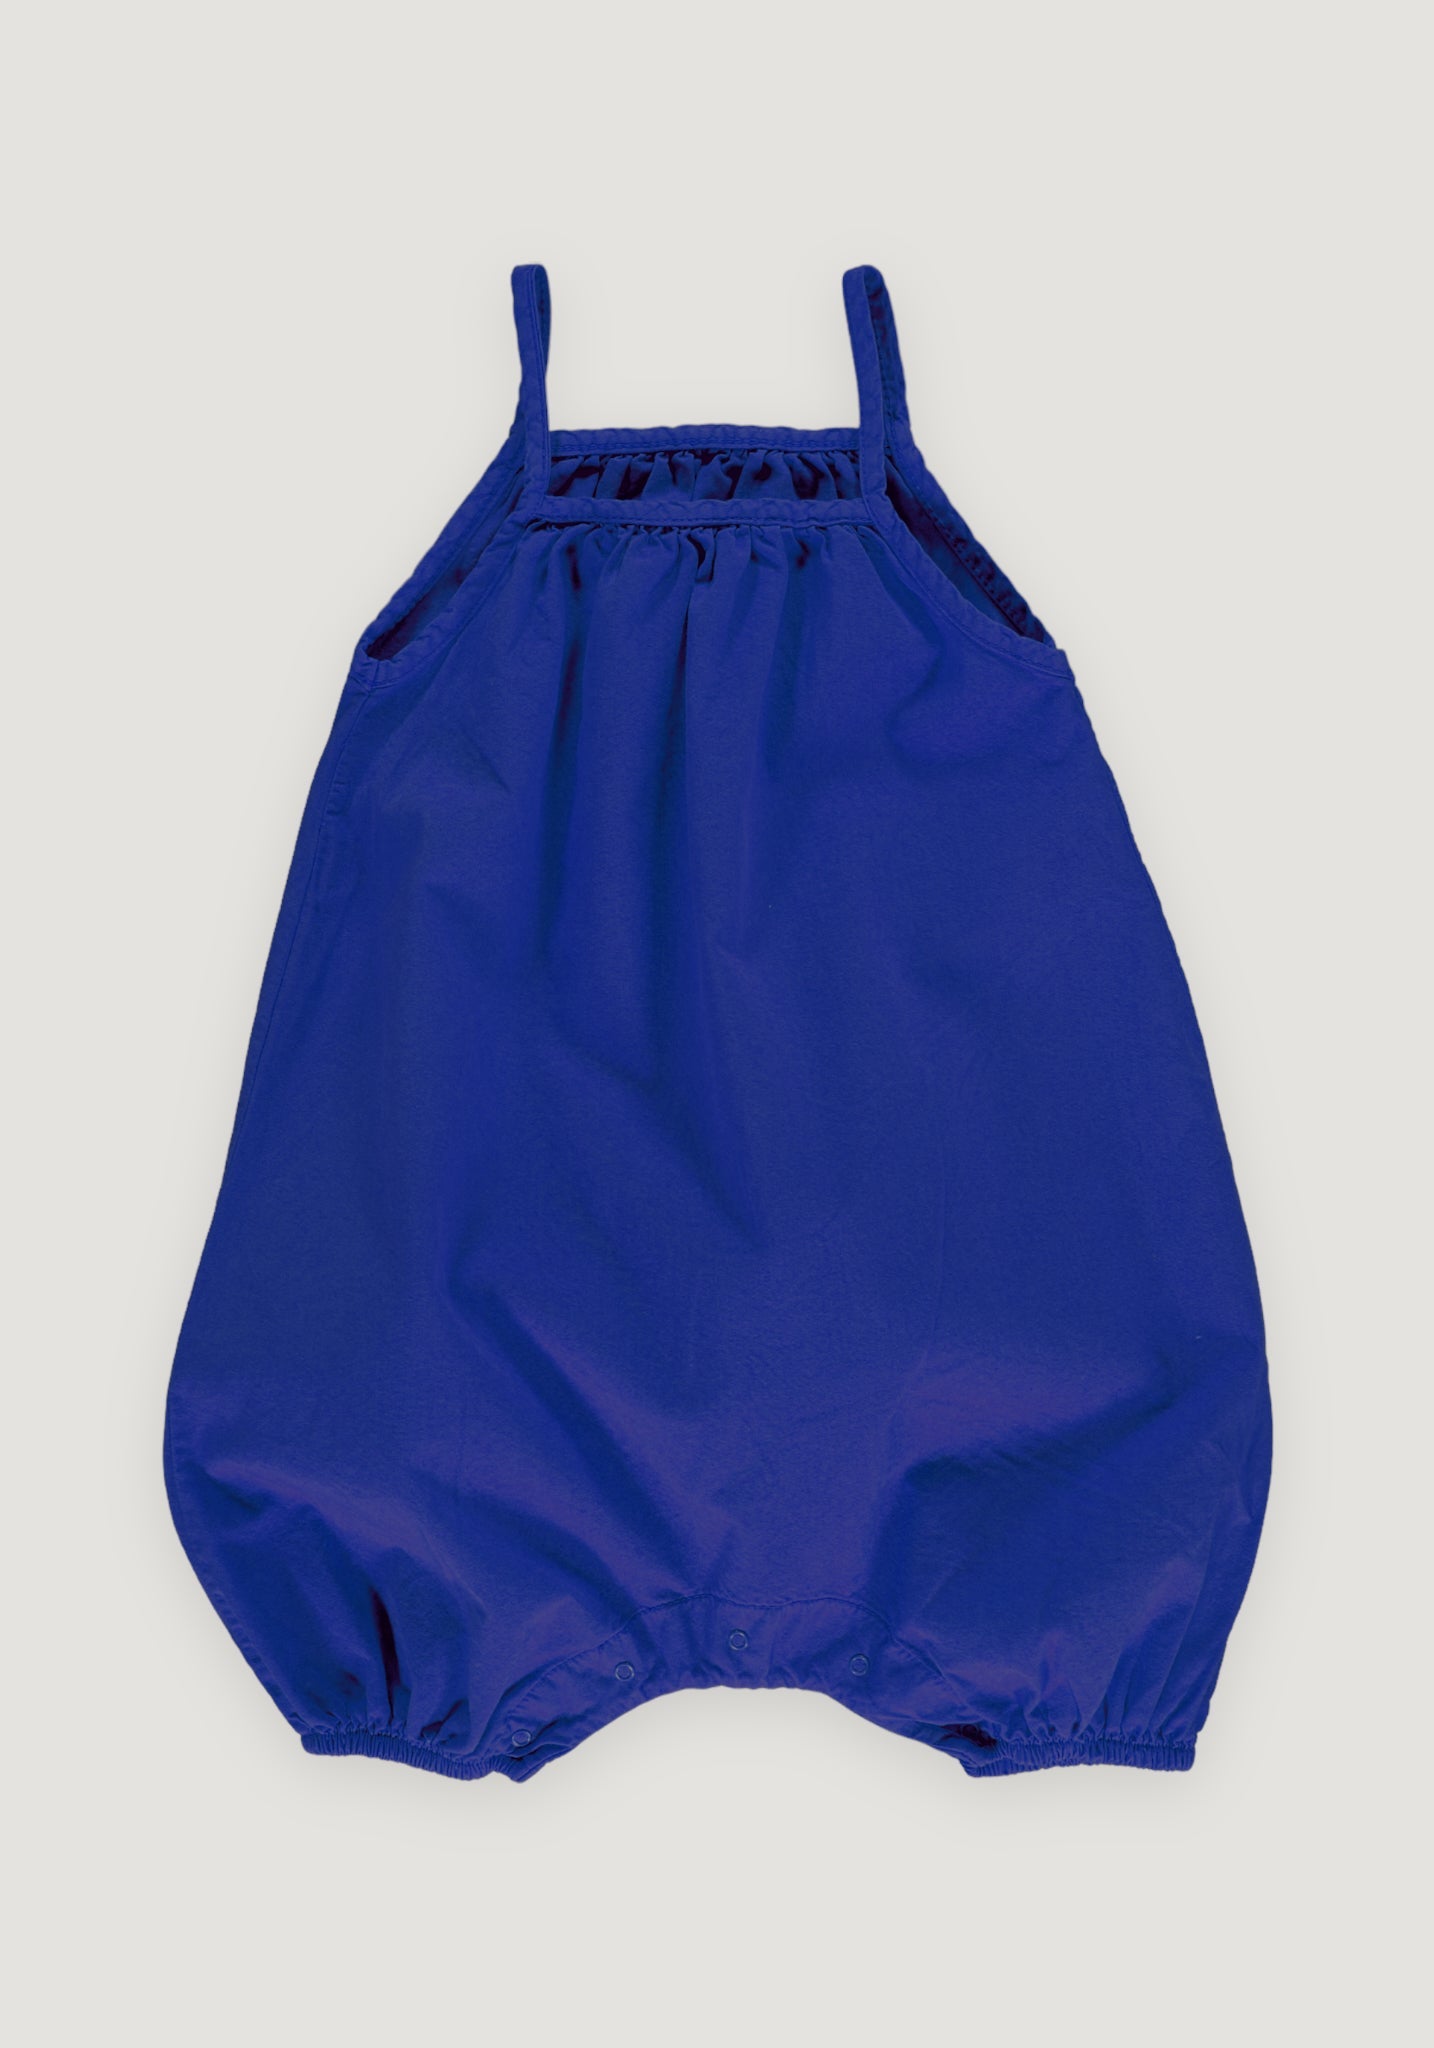 Summersuit twill din bumbac - Coucou Dazzling Blue Poudre Organic HipHip.ro